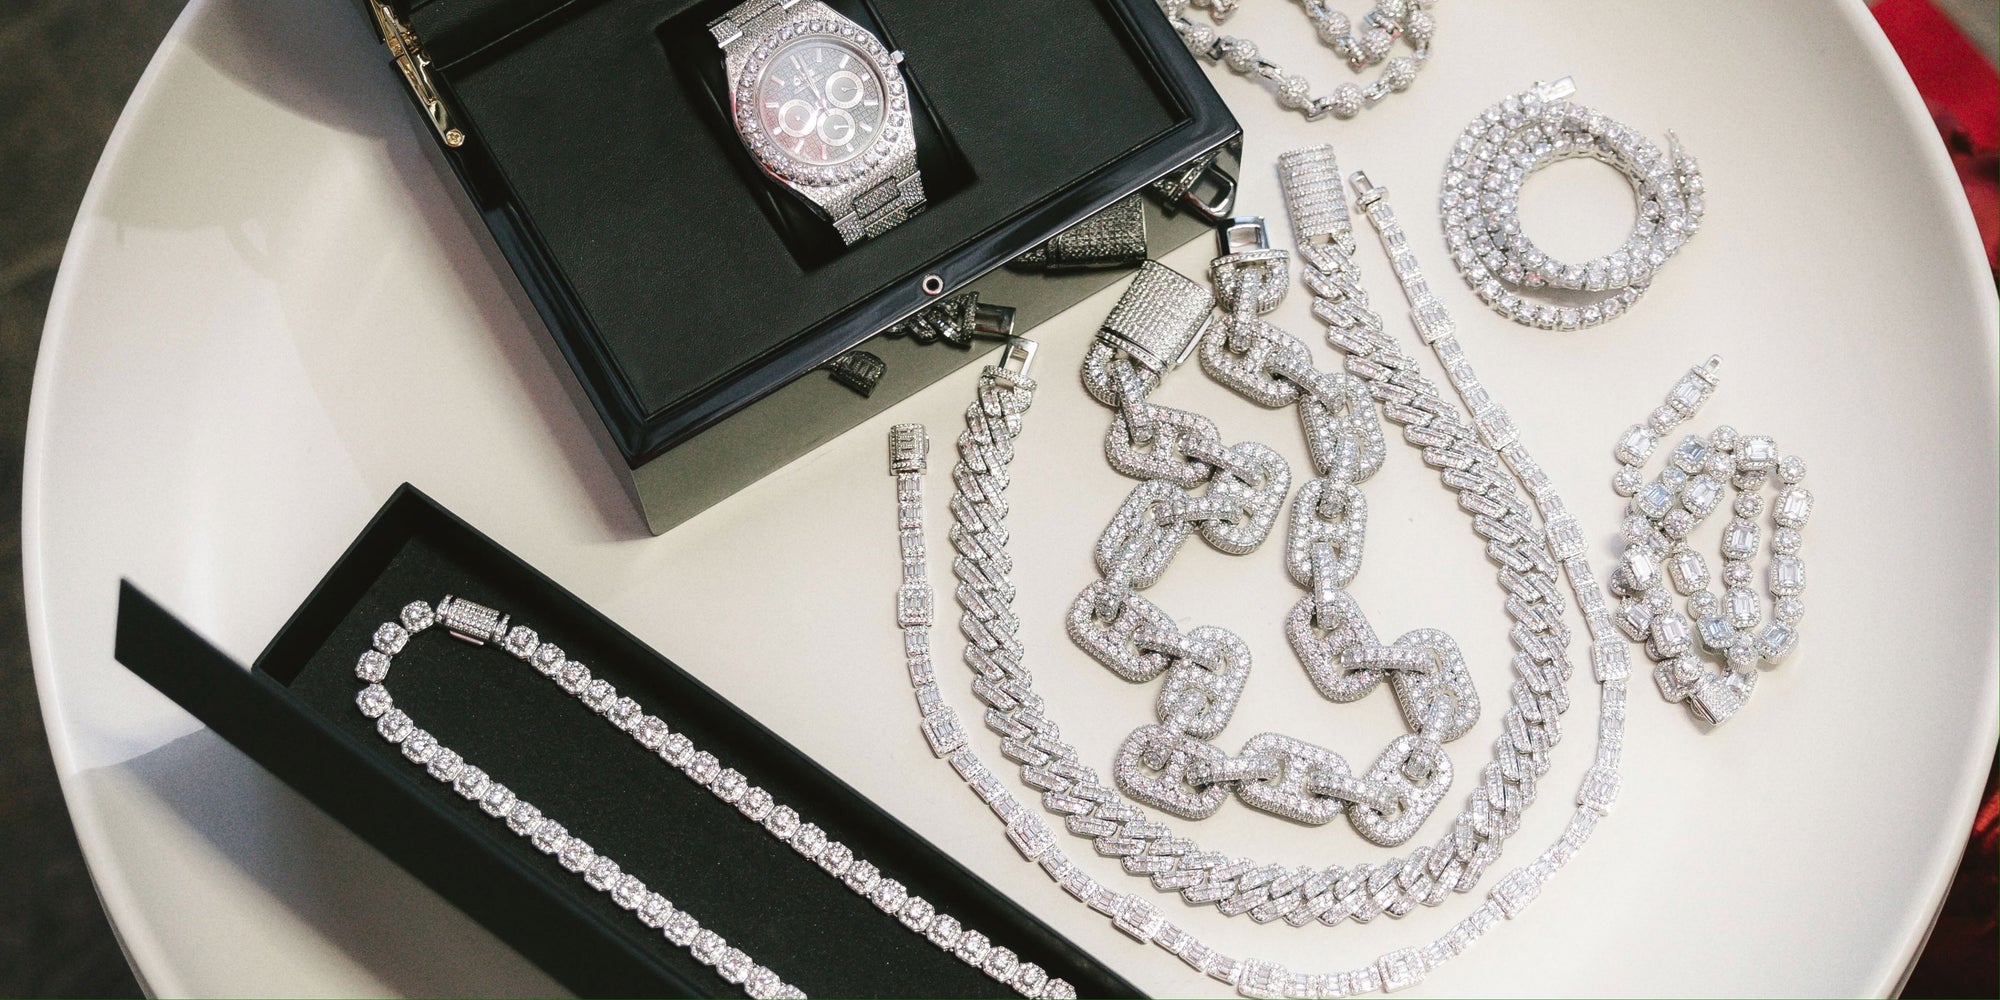 What Makes Diamonds So Valuable and Expensive?